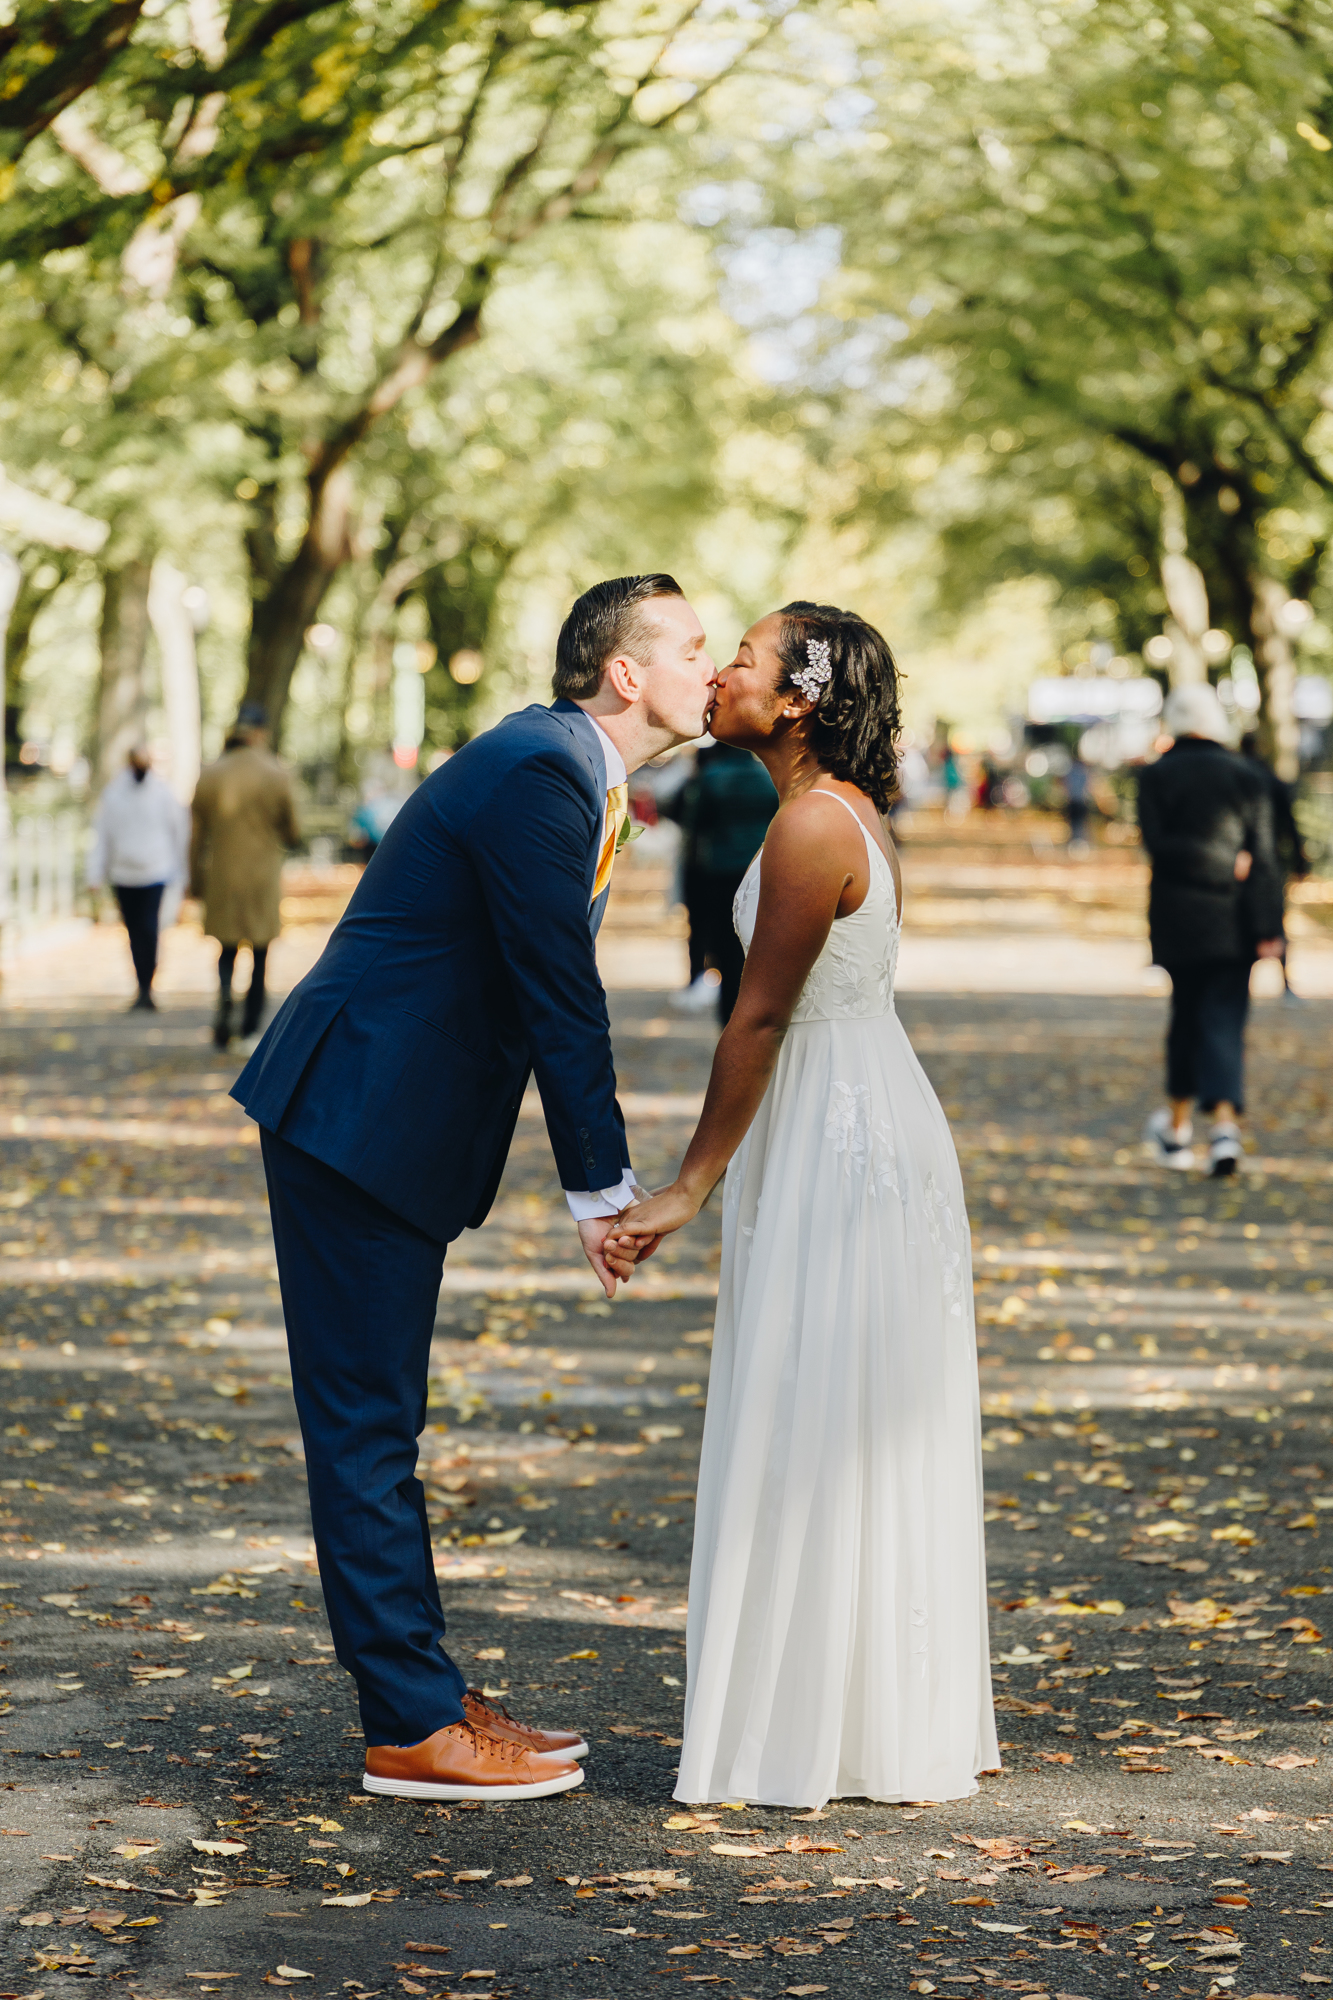 Romantic Central Park Elopement Photos in New York